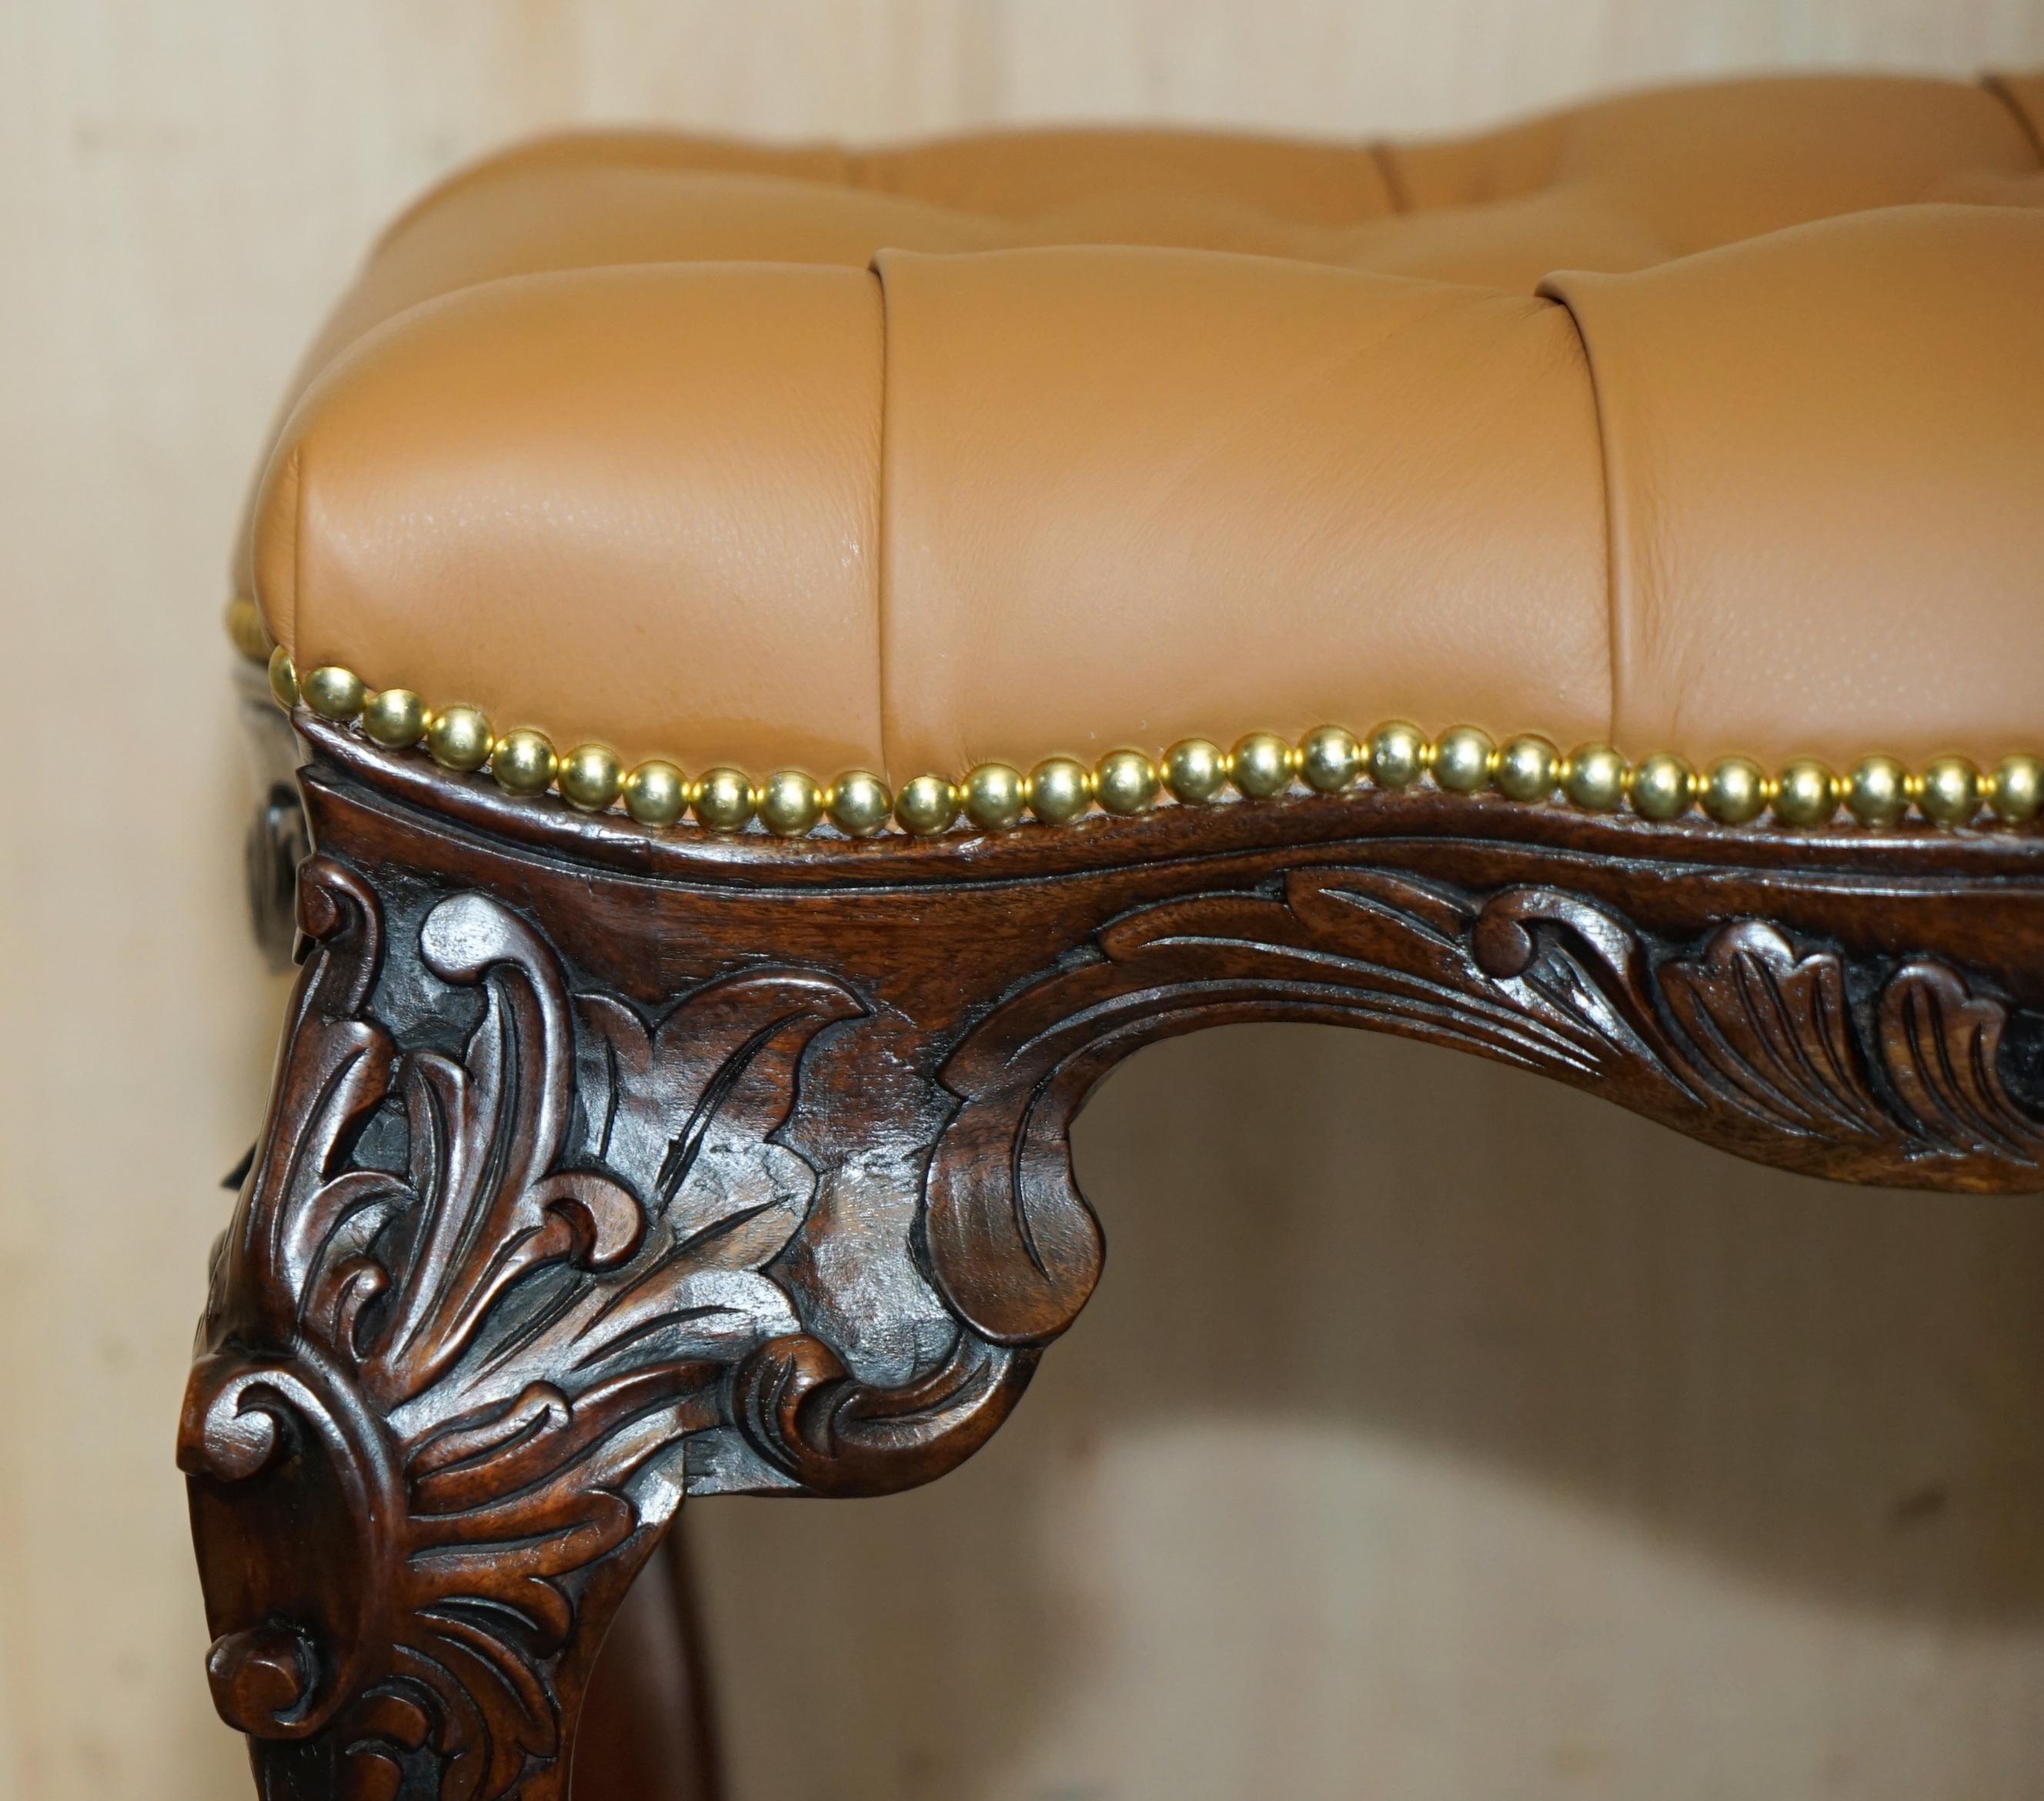 RESTORATED BROWN LEATHER CLAW & BALL CHESTERFIELD PIANO OR DRESSiNG TABLE STOOL (Handgefertigt) im Angebot